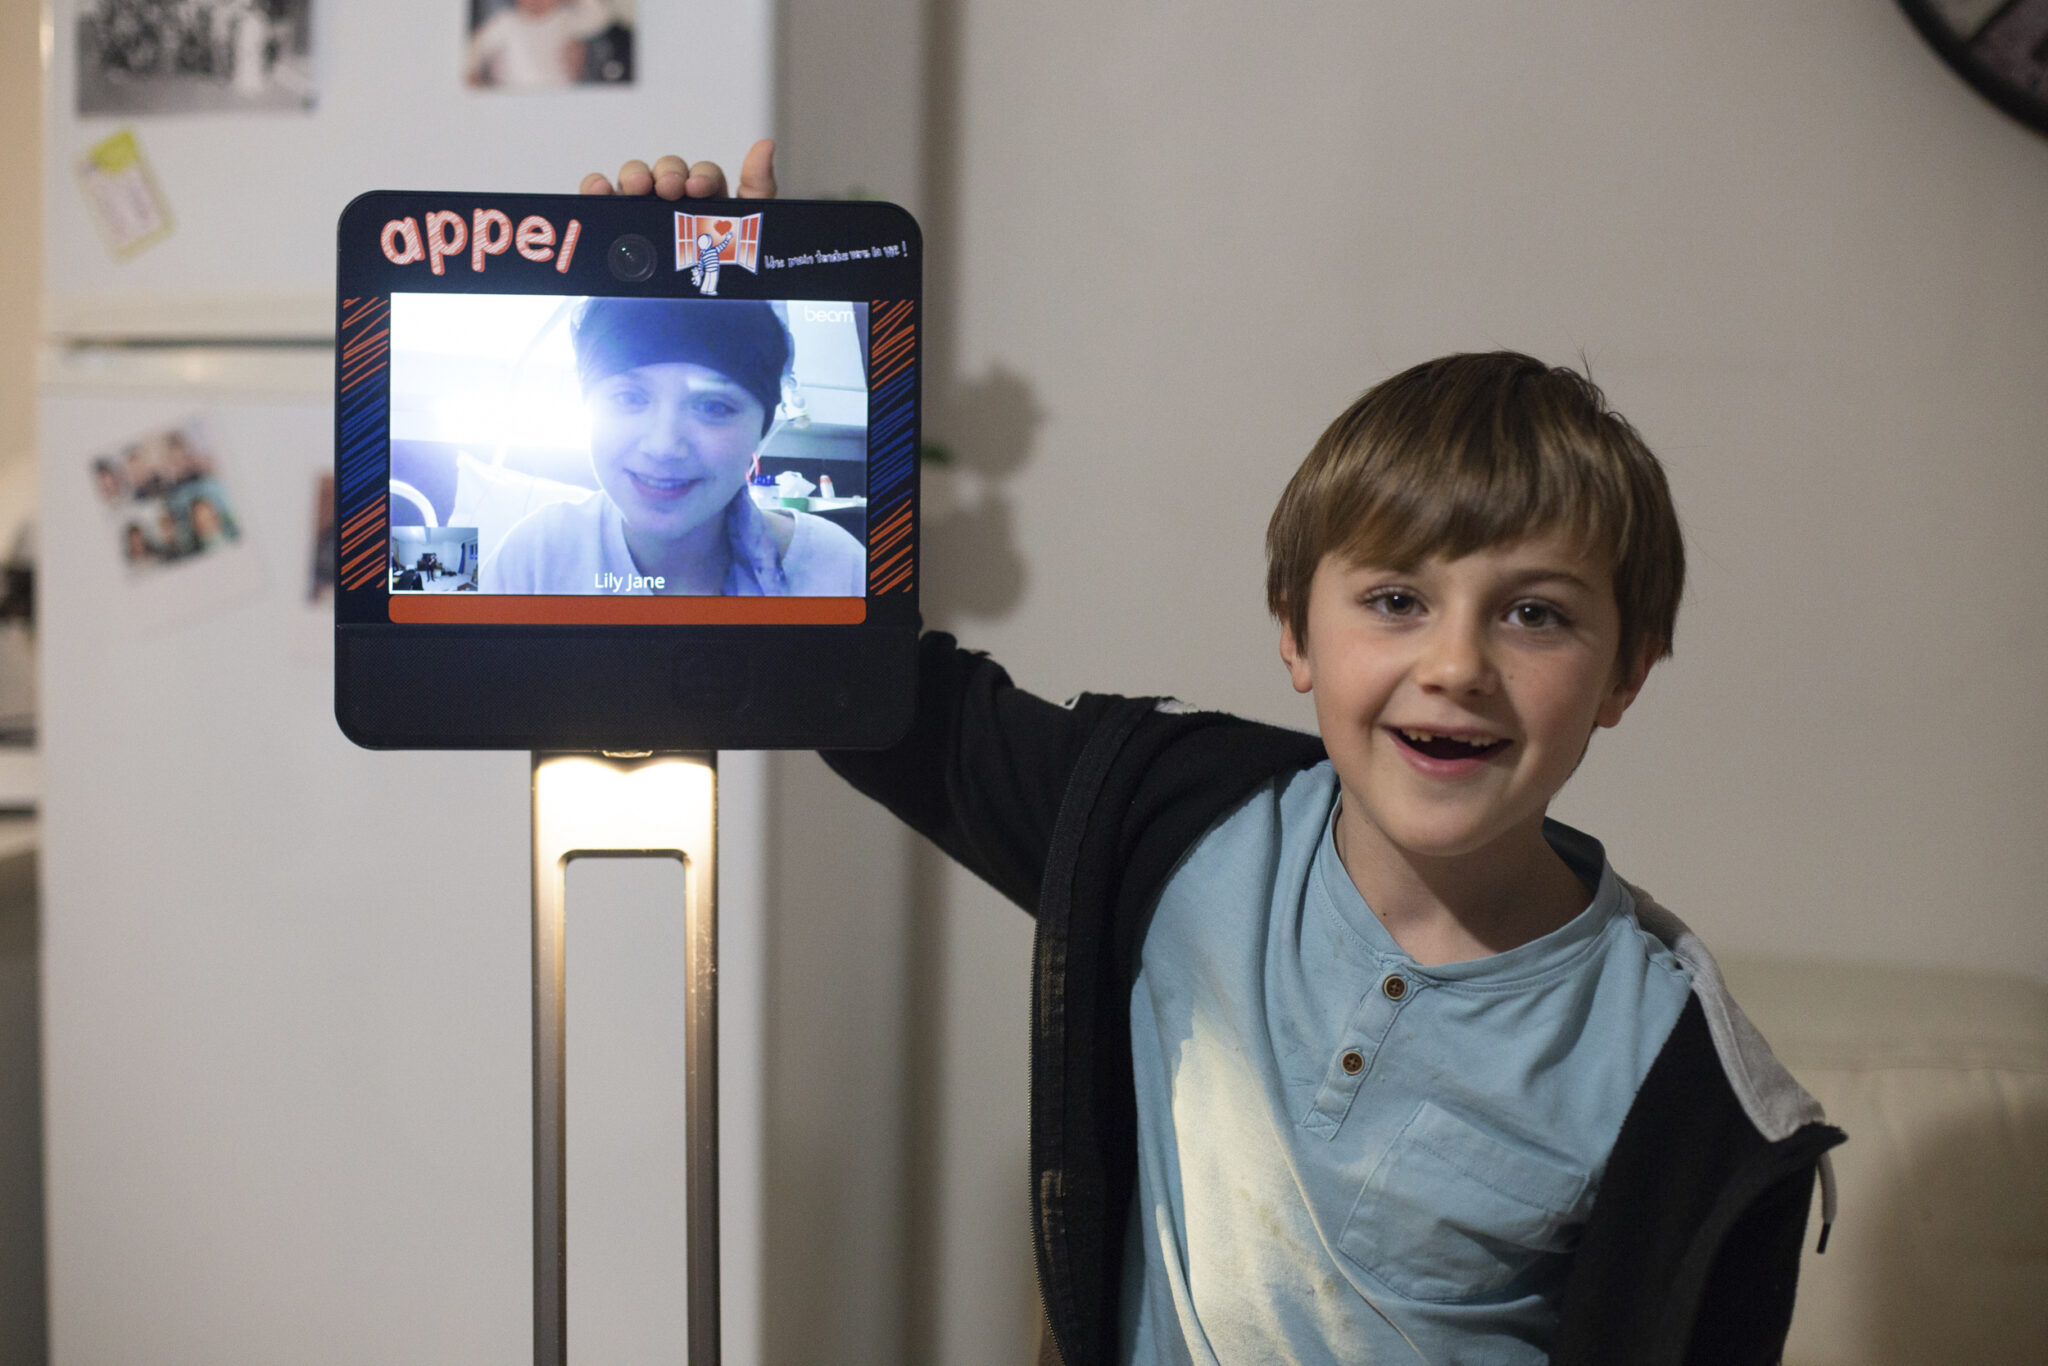 Pediatric oncology: the benefits of telepresence for hospitalized children